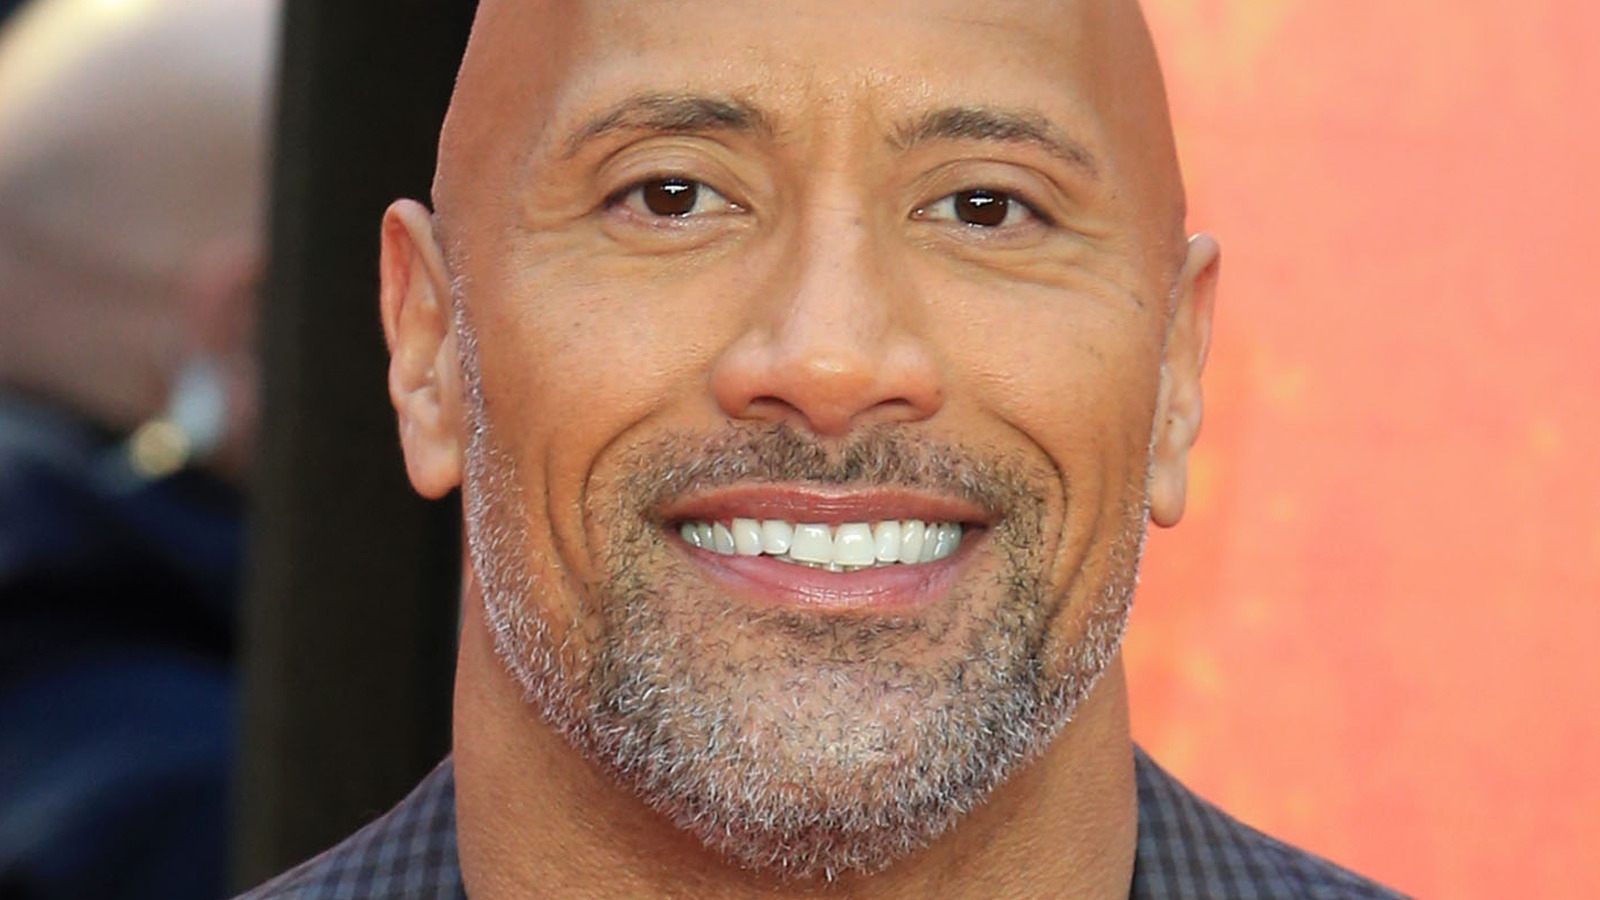 Black Adam: Dwayne Johnson Made A Lot More Than The Combined Salary Of The  Star Cast - Check Out How Much Everyone Earned!